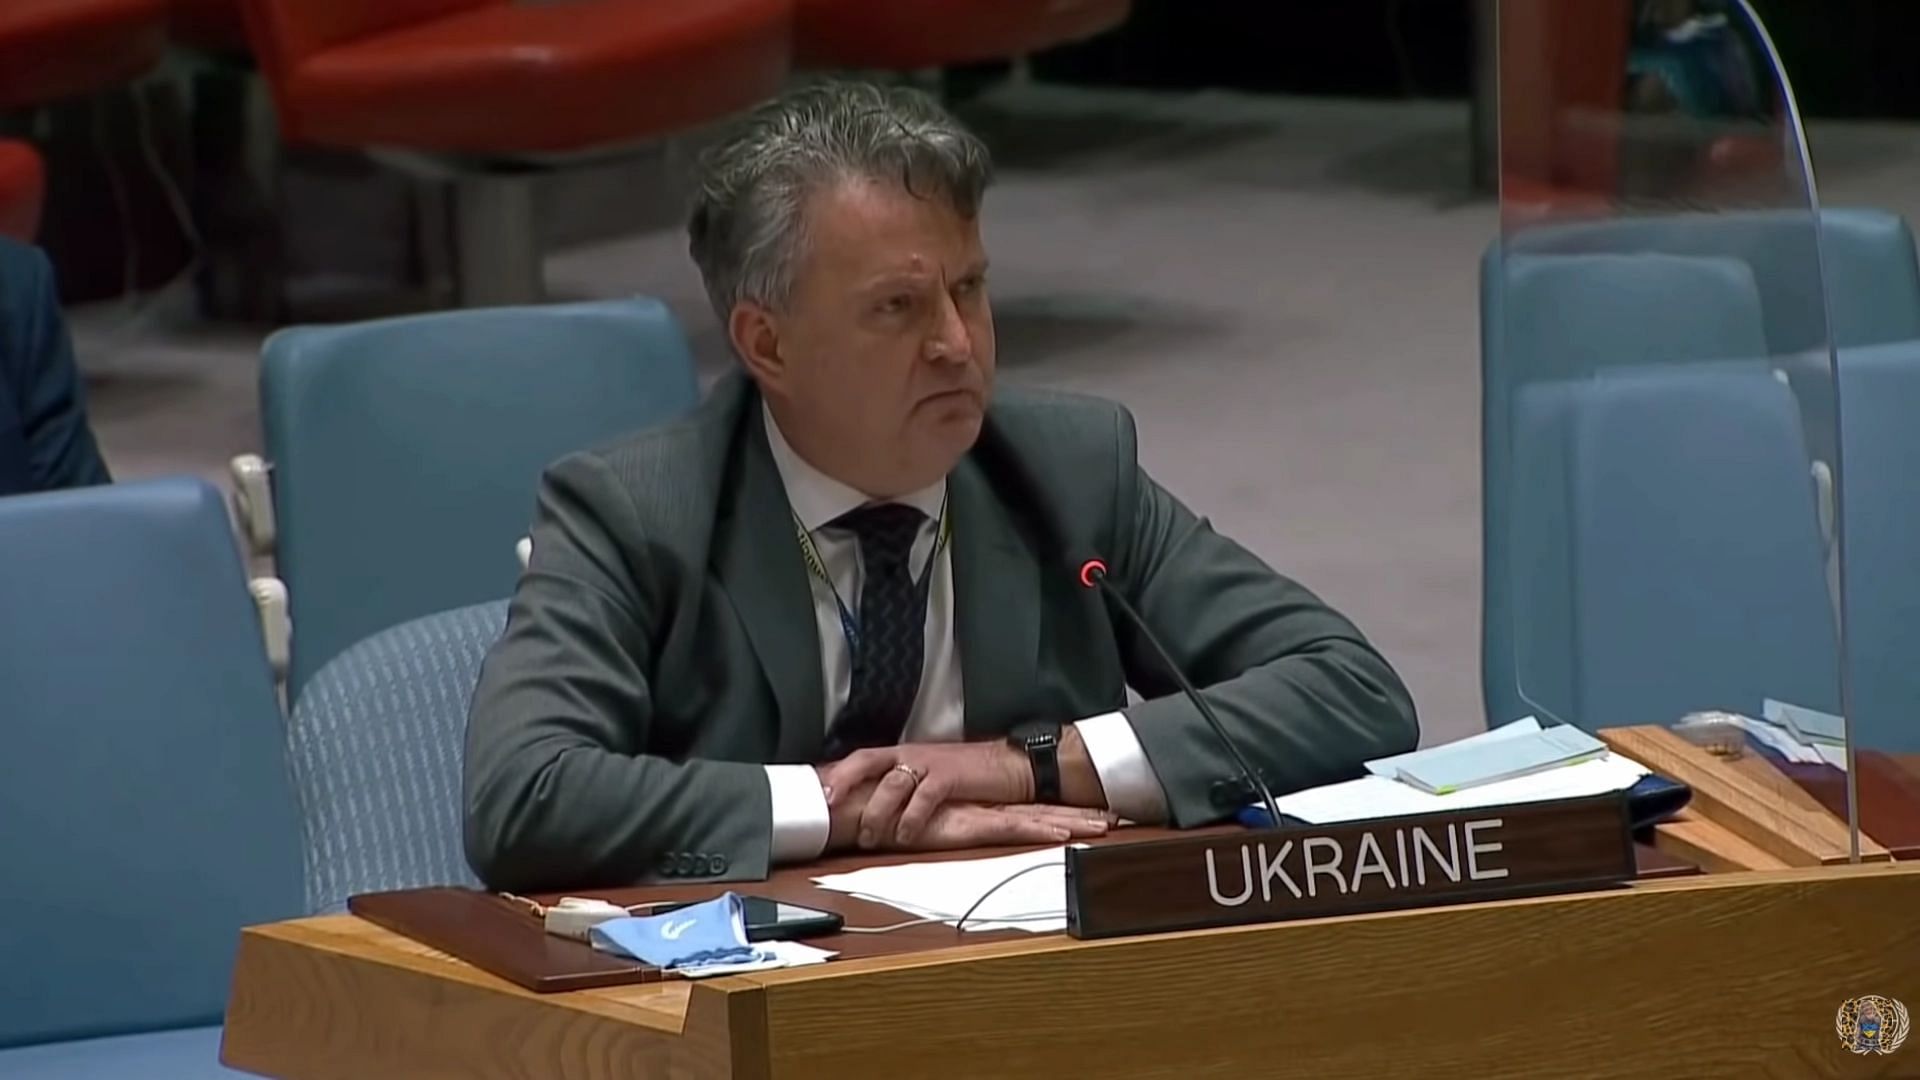 <div class="paragraphs"><p>Ukraine‘s ambassador to UN, <a href="https://www.thequint.com/news/world/vladmir-putin-recognises-two-breakaway-regions-in-ukraine-as-independent-entities#read-more">Sergiy Kyslytsya</a>, delivering a fierce speech in an emergency UNSC meeting on Wednesday, condemned Russia for declaring war.</p></div>